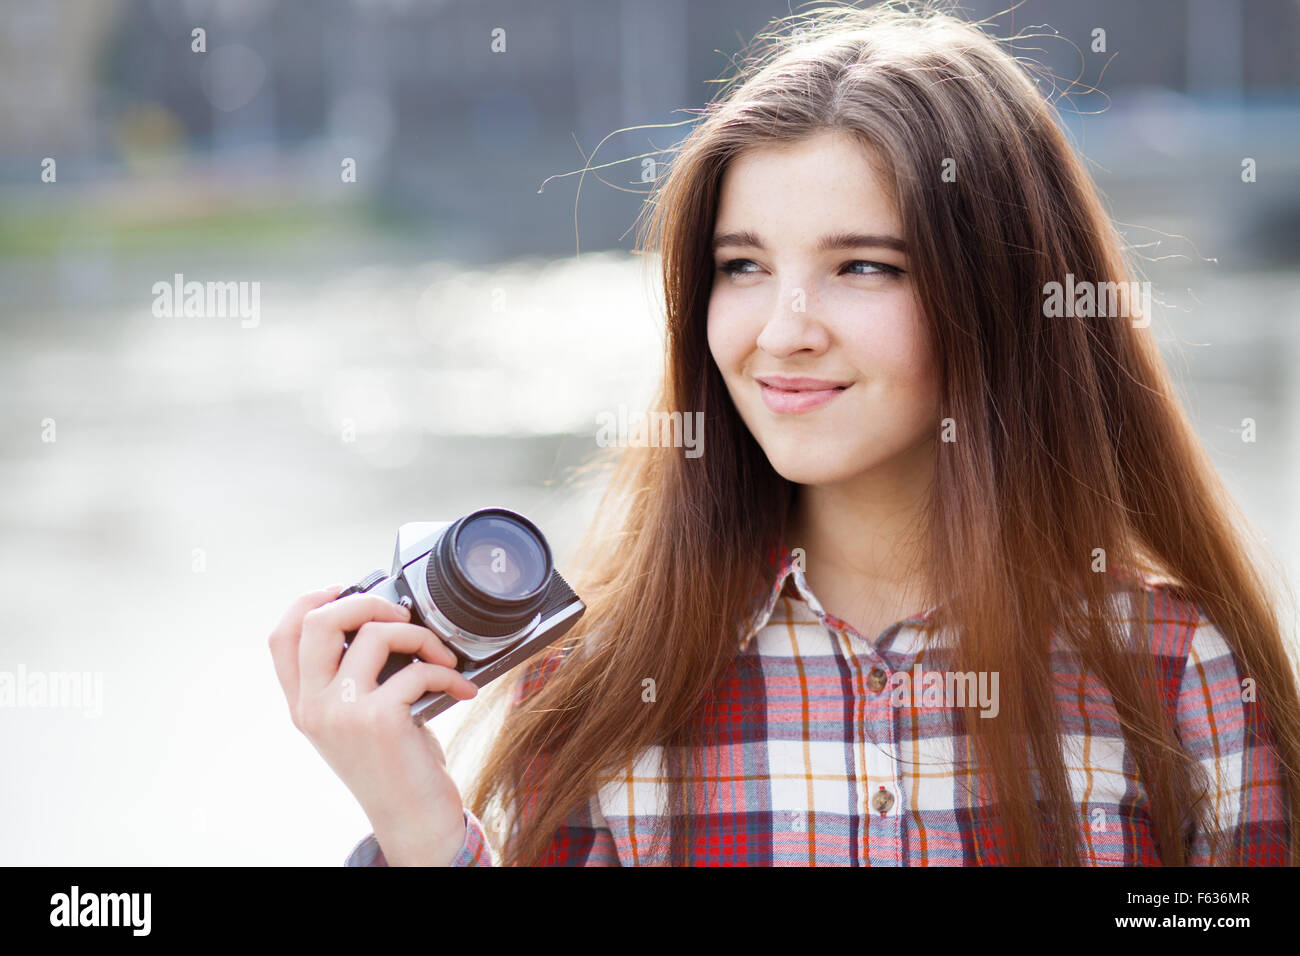 Portrait of a young woman with photo camera Stock Photo